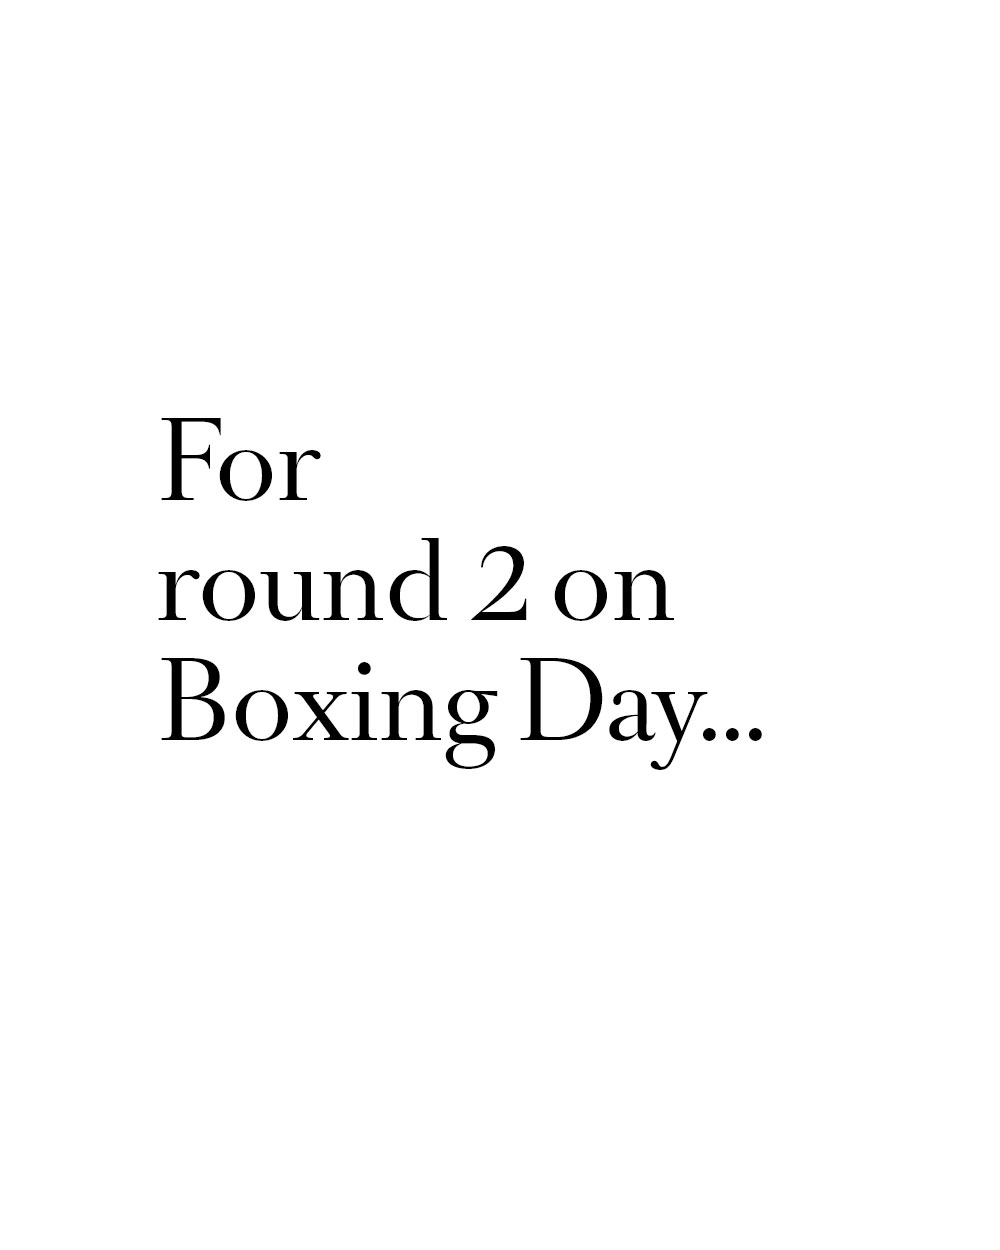 For round 2 on Boxing Day...